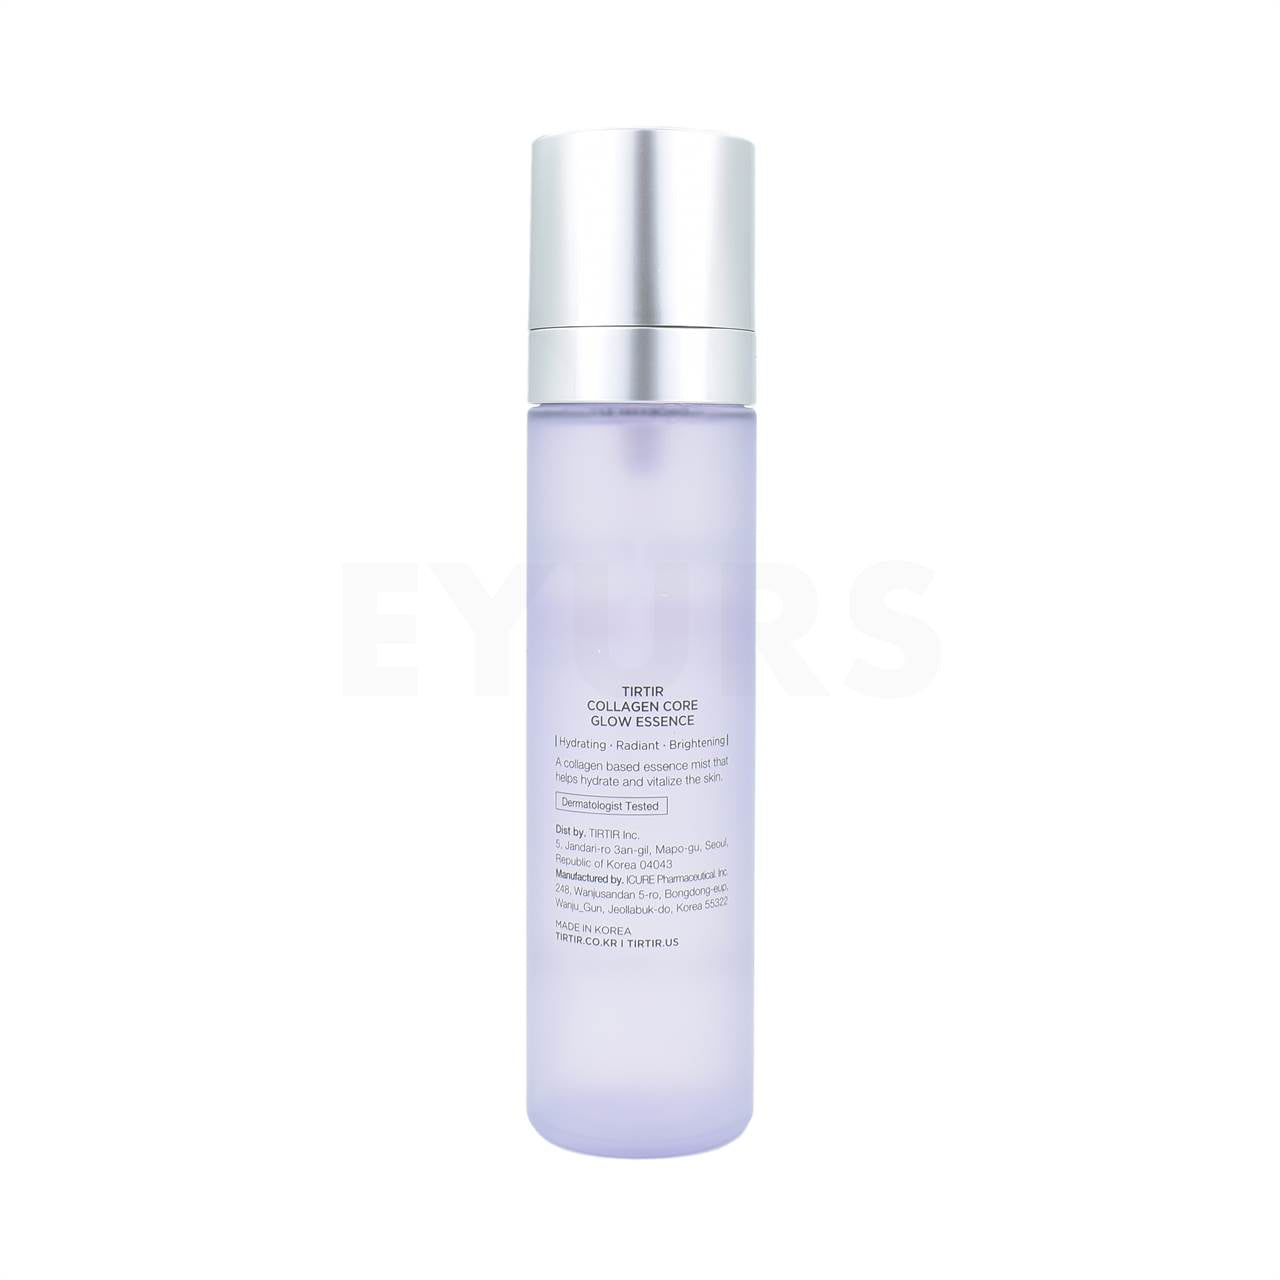 tirtir collagen core glow essence back of product